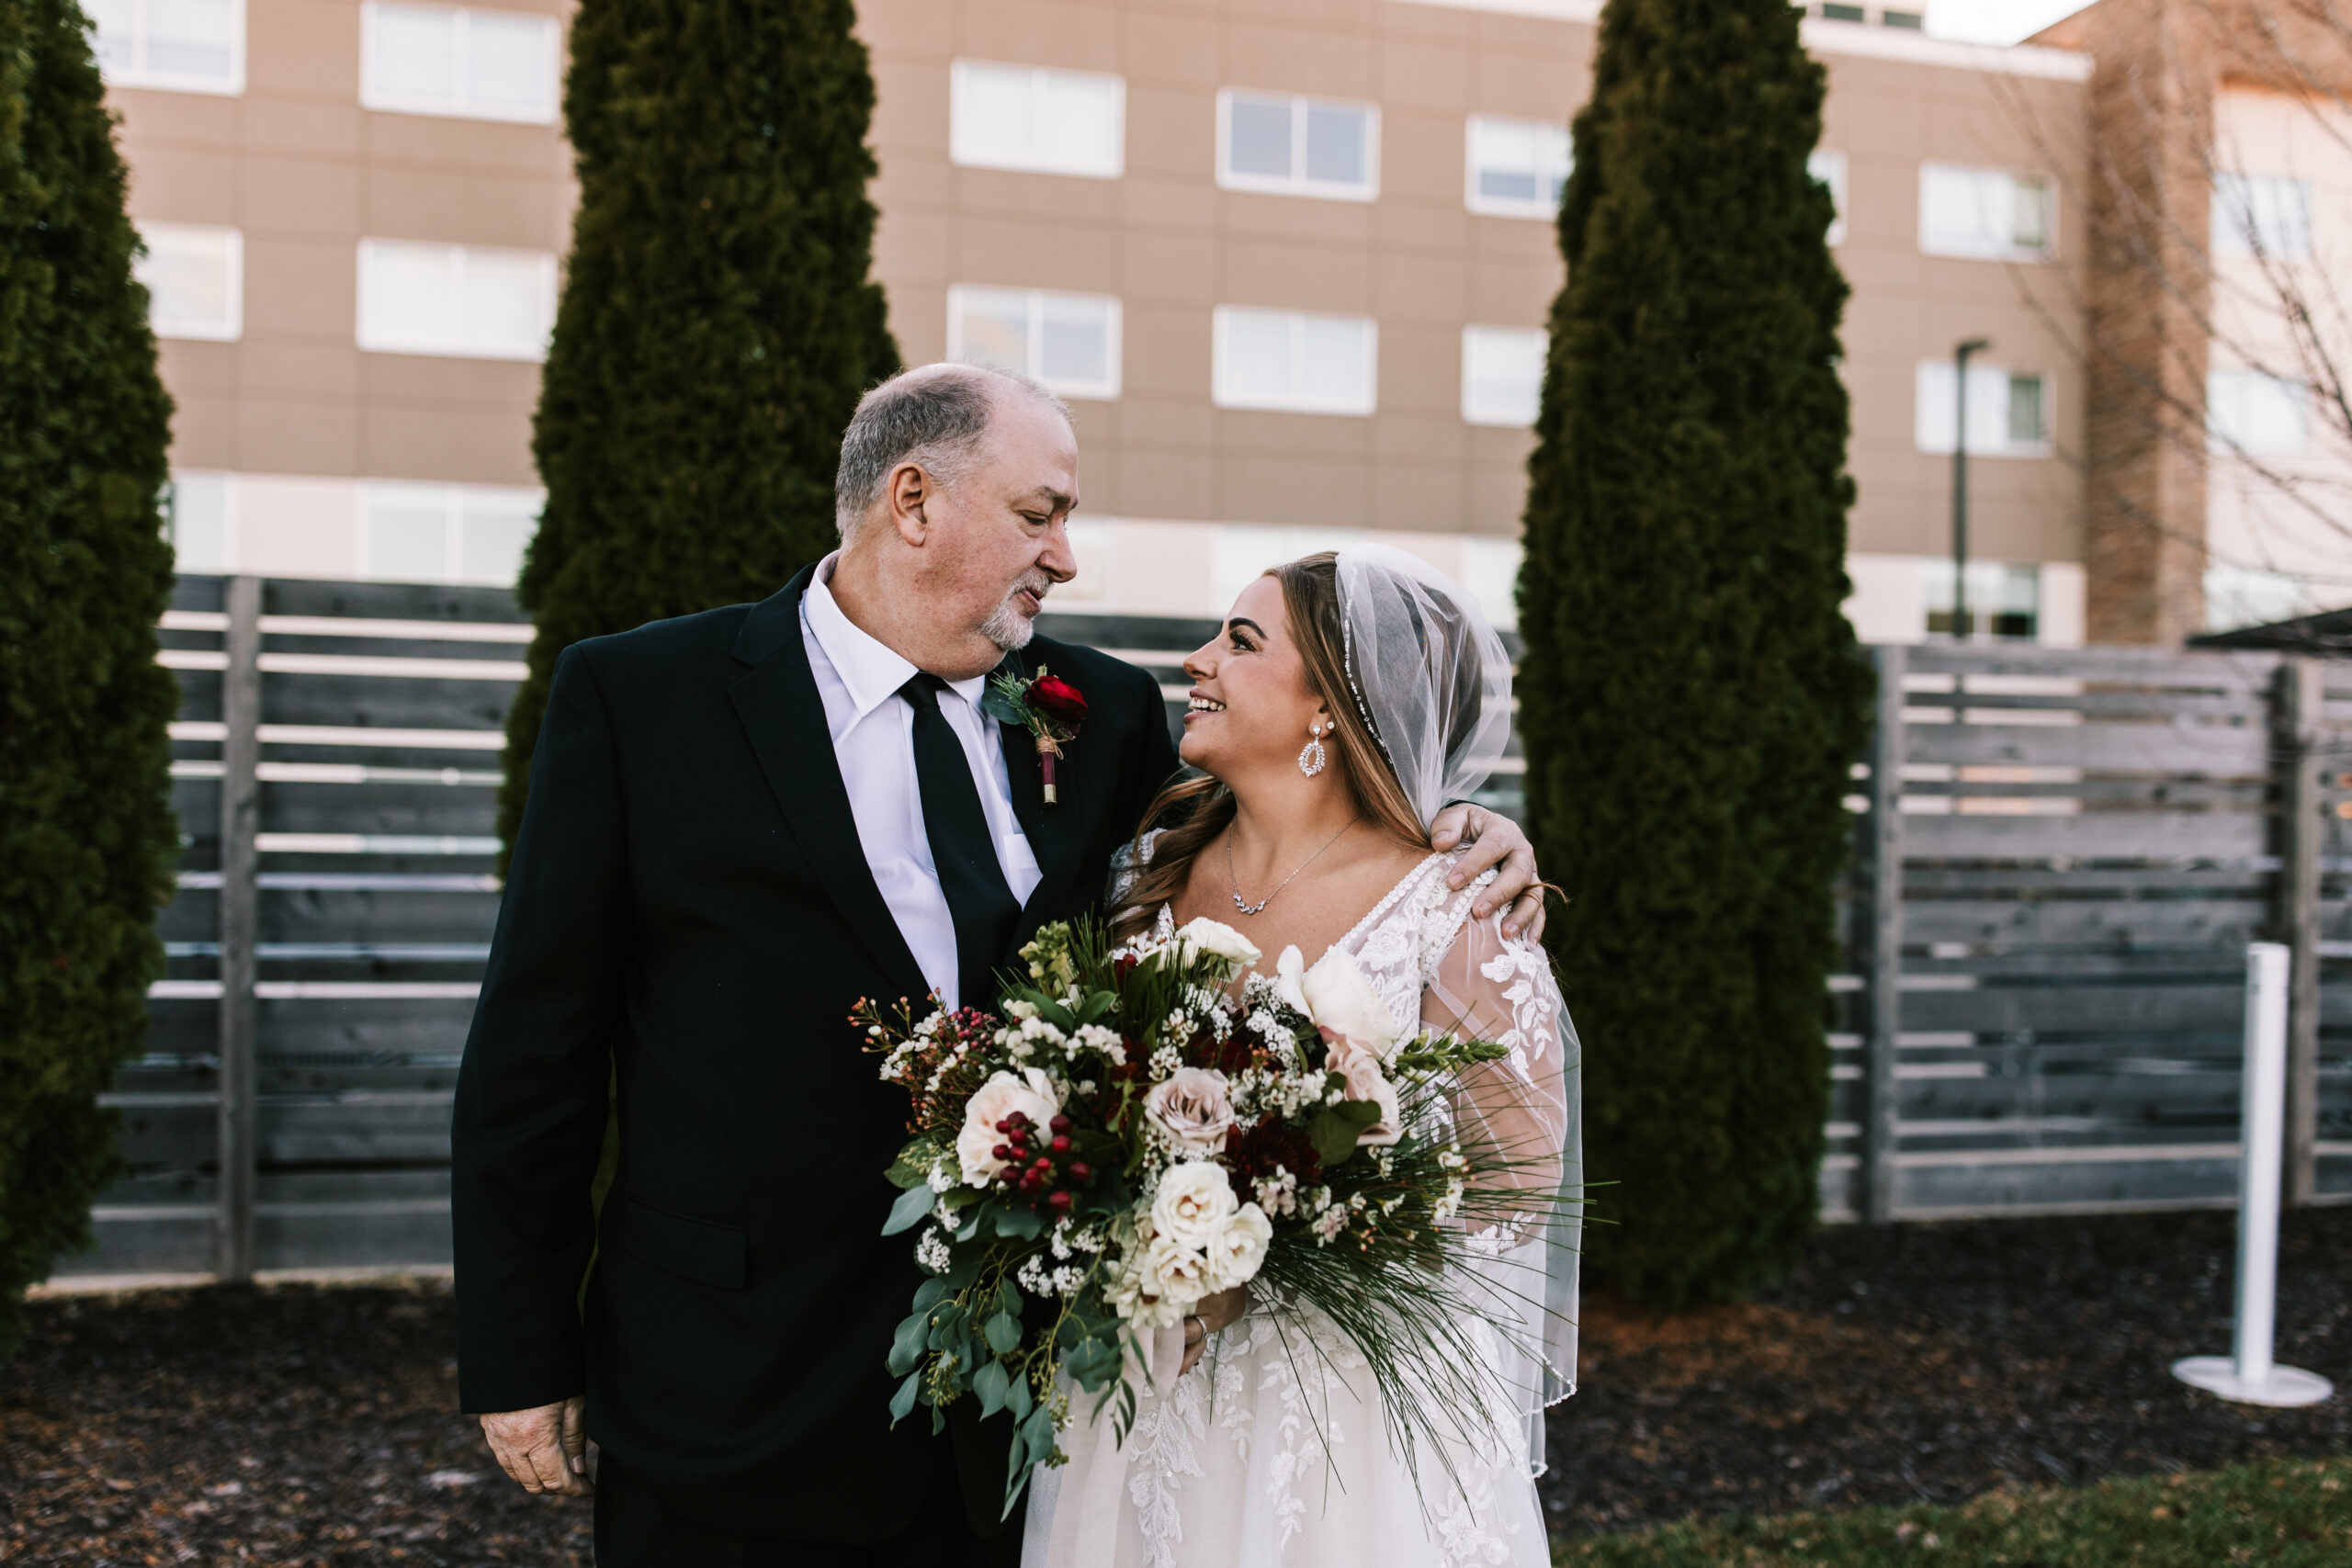 Father looking lovingly on his daughter - the bride- at a Springfield, Missouri wedding venue. Photo by Bailey Morris wedding photography.